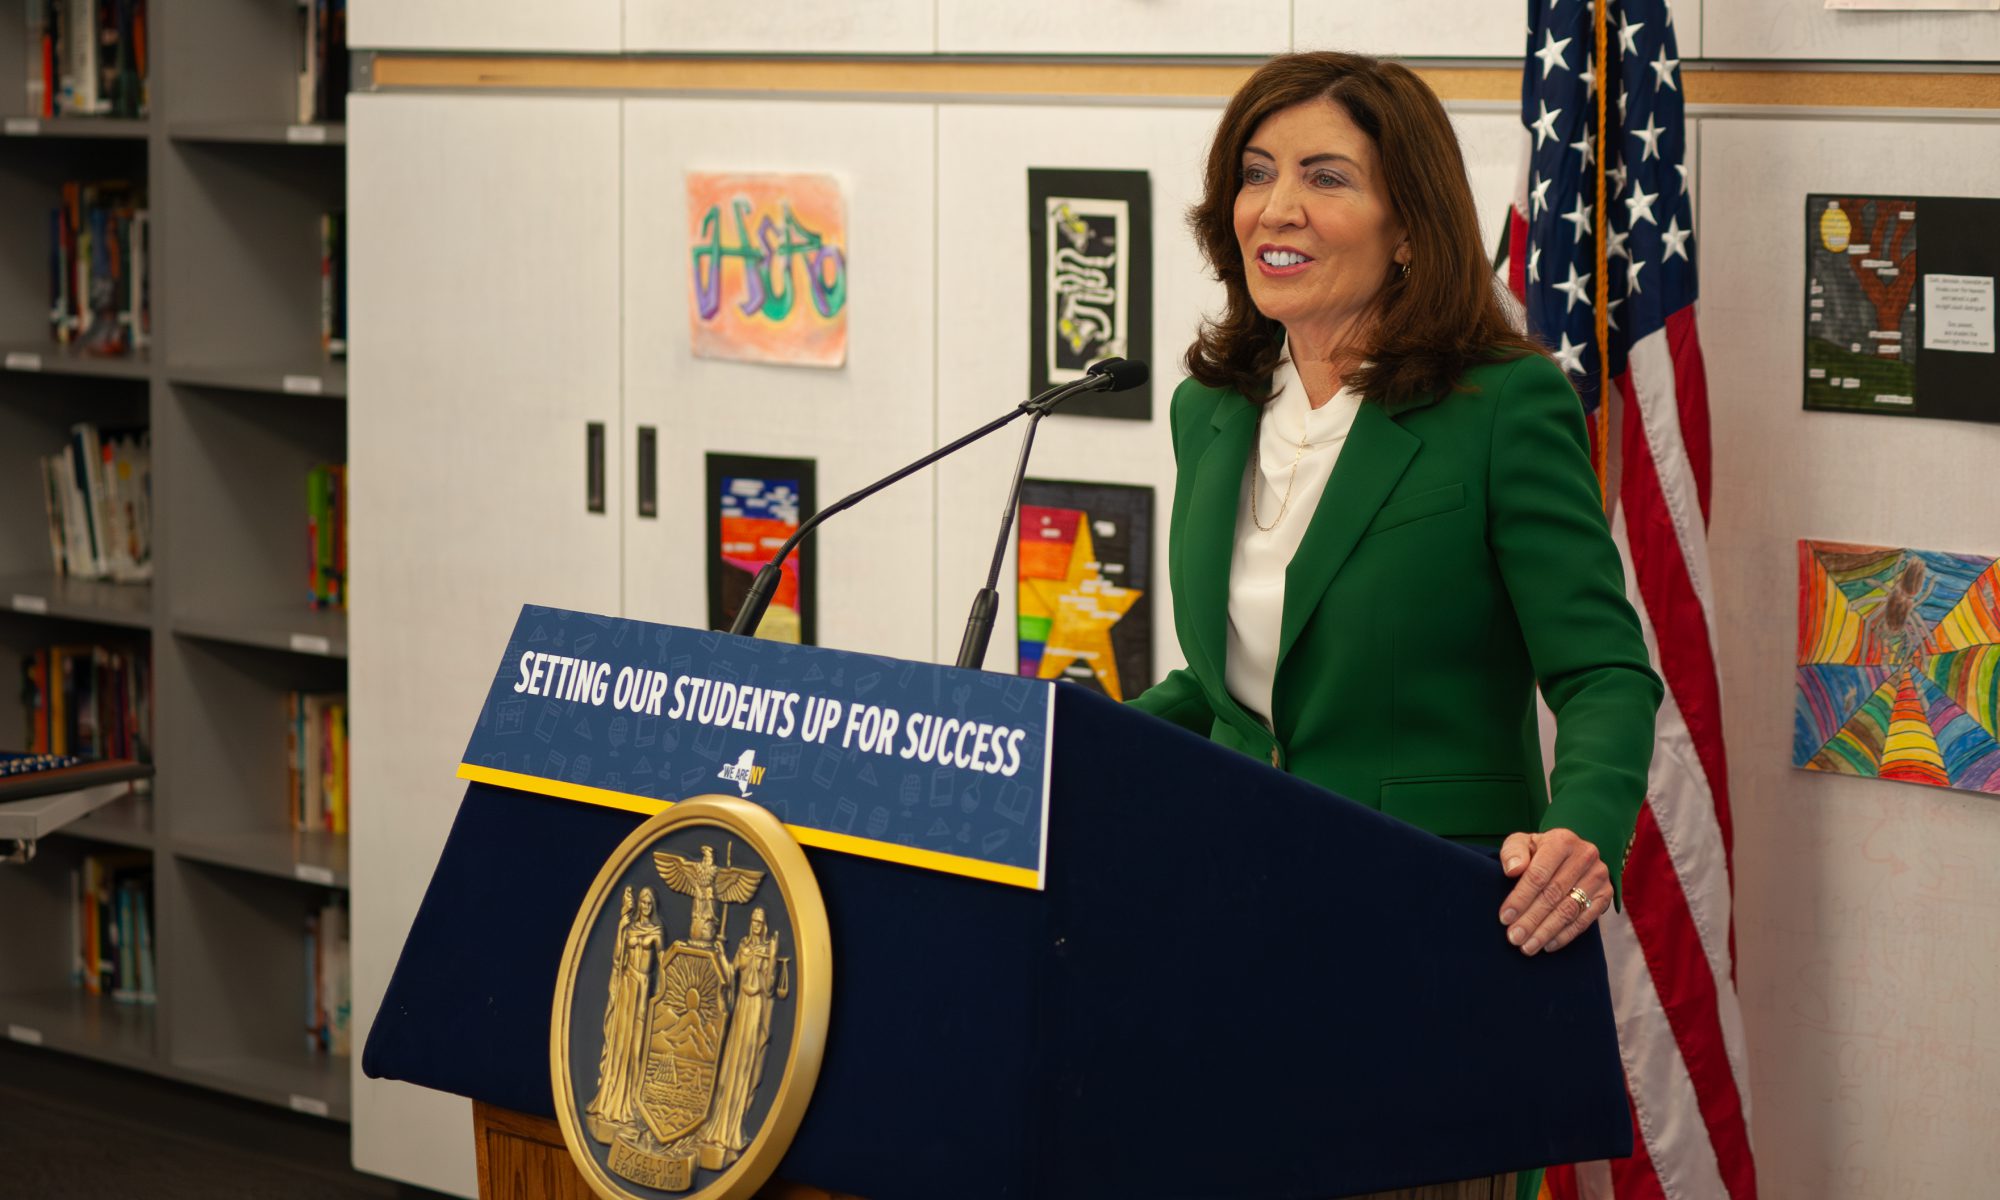 New York State Governor Kathy Hochul stands behind the dais as she speaks in front of members of the Tech Valley High School community during a visit on Thursday, Sept. 7.